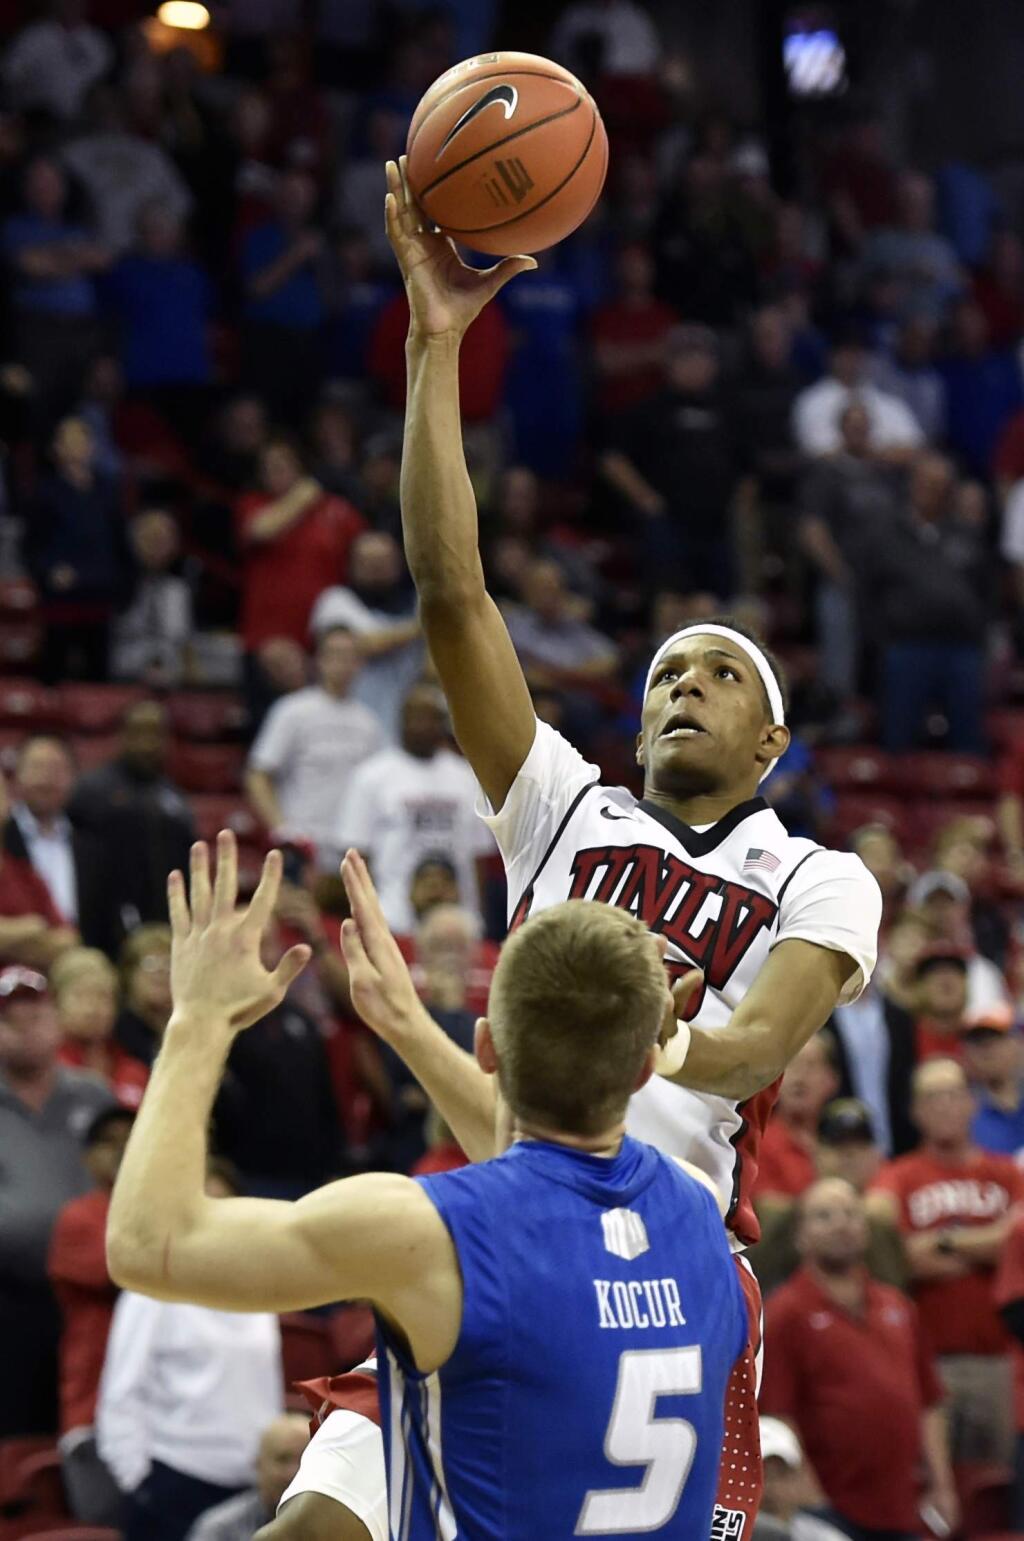 UNLV's Patrick McCaw (22) shoots over Air Force's Zach Kocur (5) during a game at the Mountain West Conference men's tournament Wednesday, March 9, 2016, in Las Vegas. UNLV won 108-102 in triple overtime. (AP Photo/David Becker)